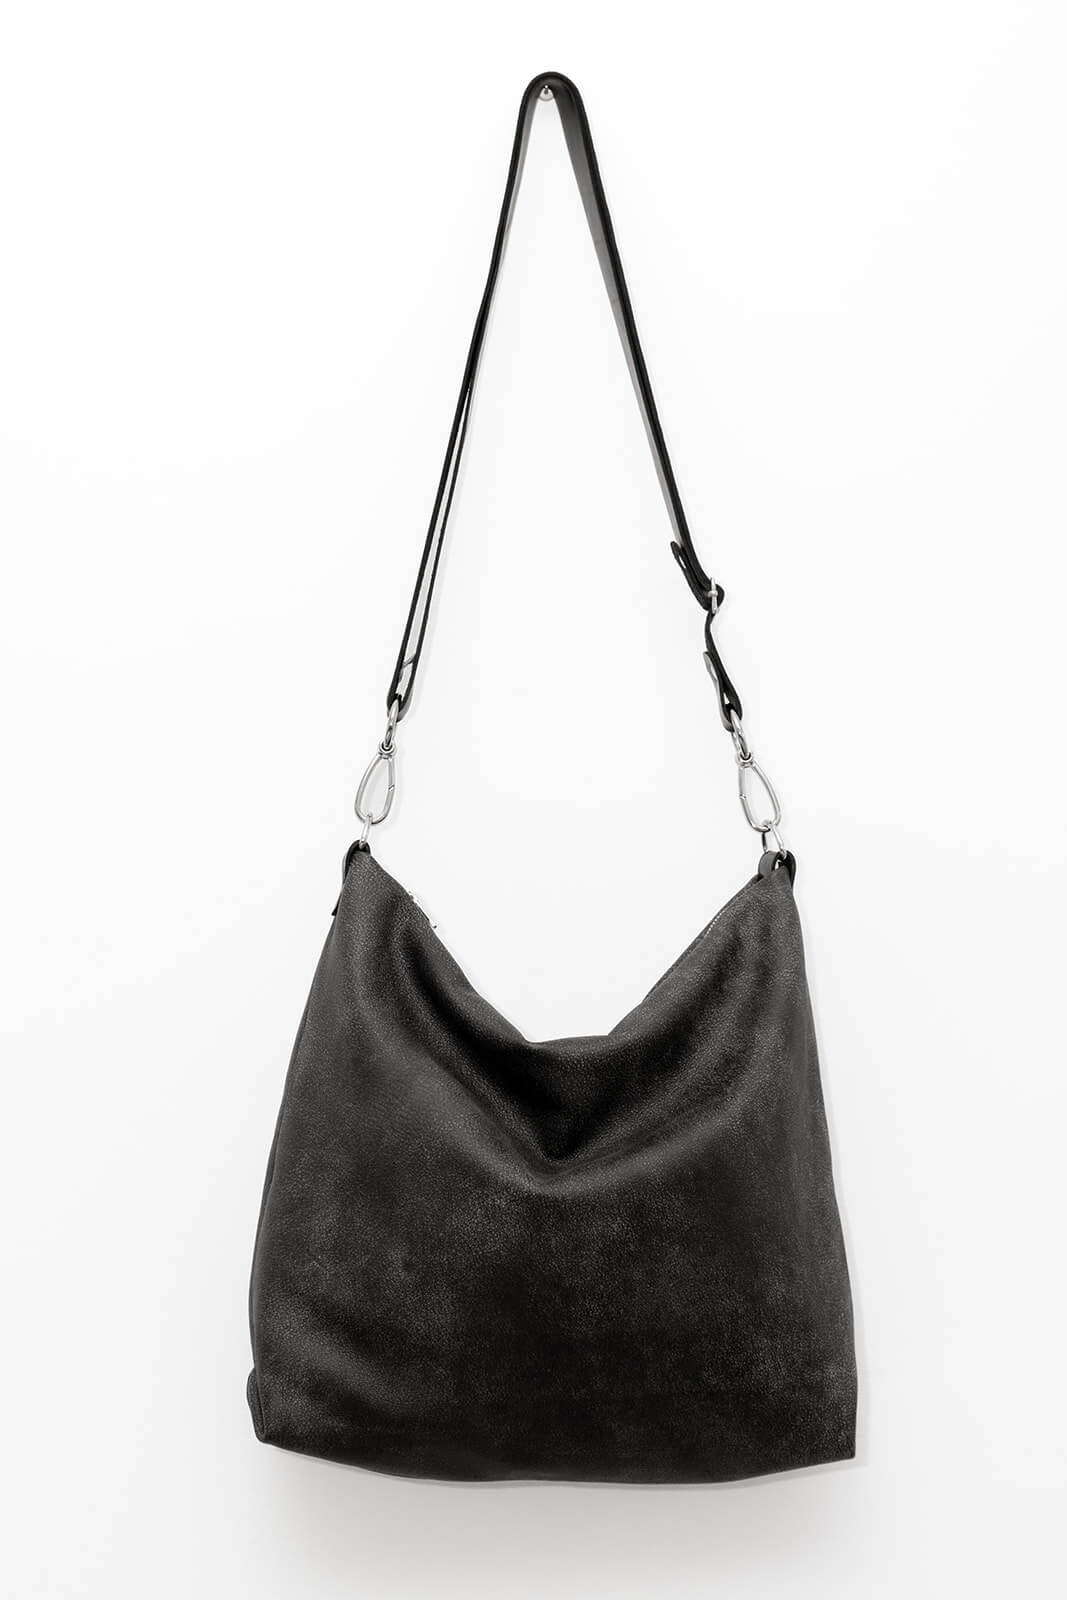 Grey carryall bag with black strap and silver hardware hanging on white background